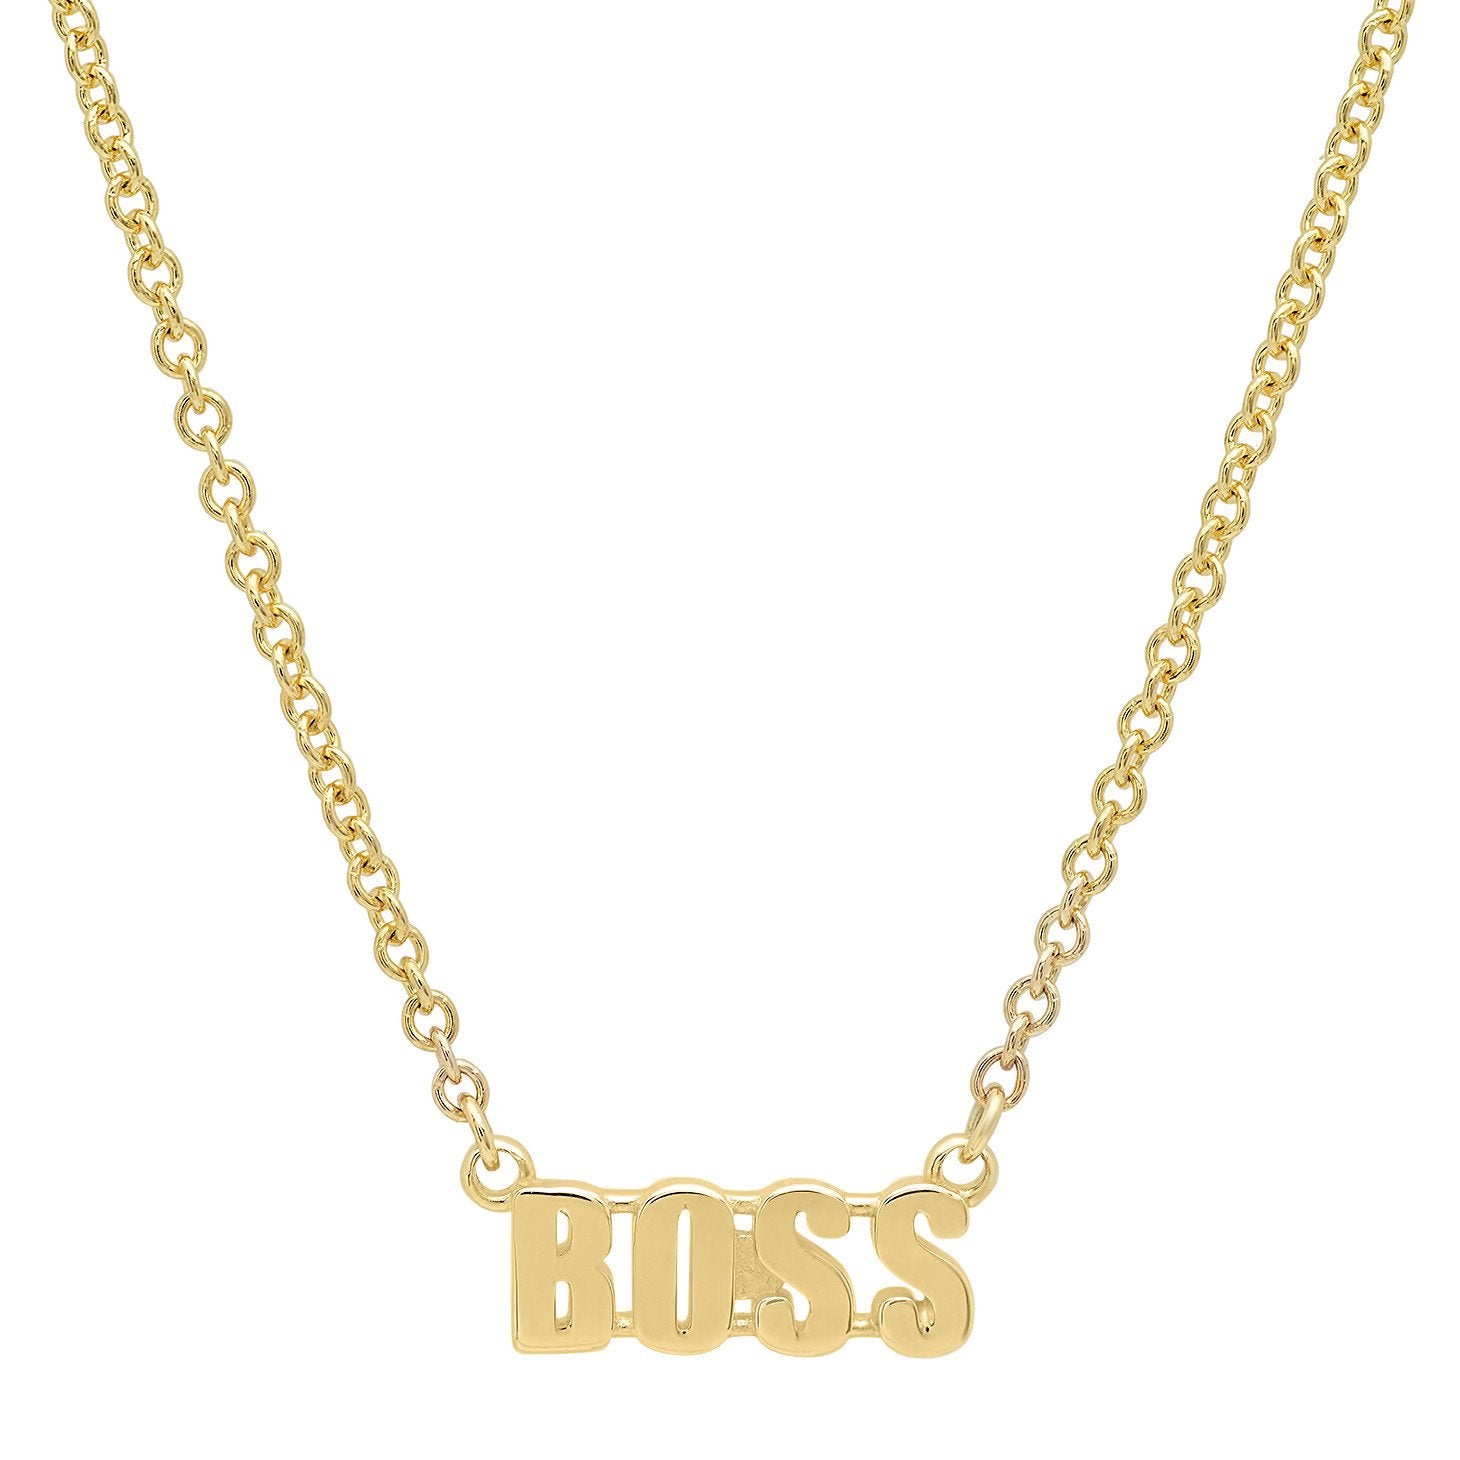 "Boss" Necklace